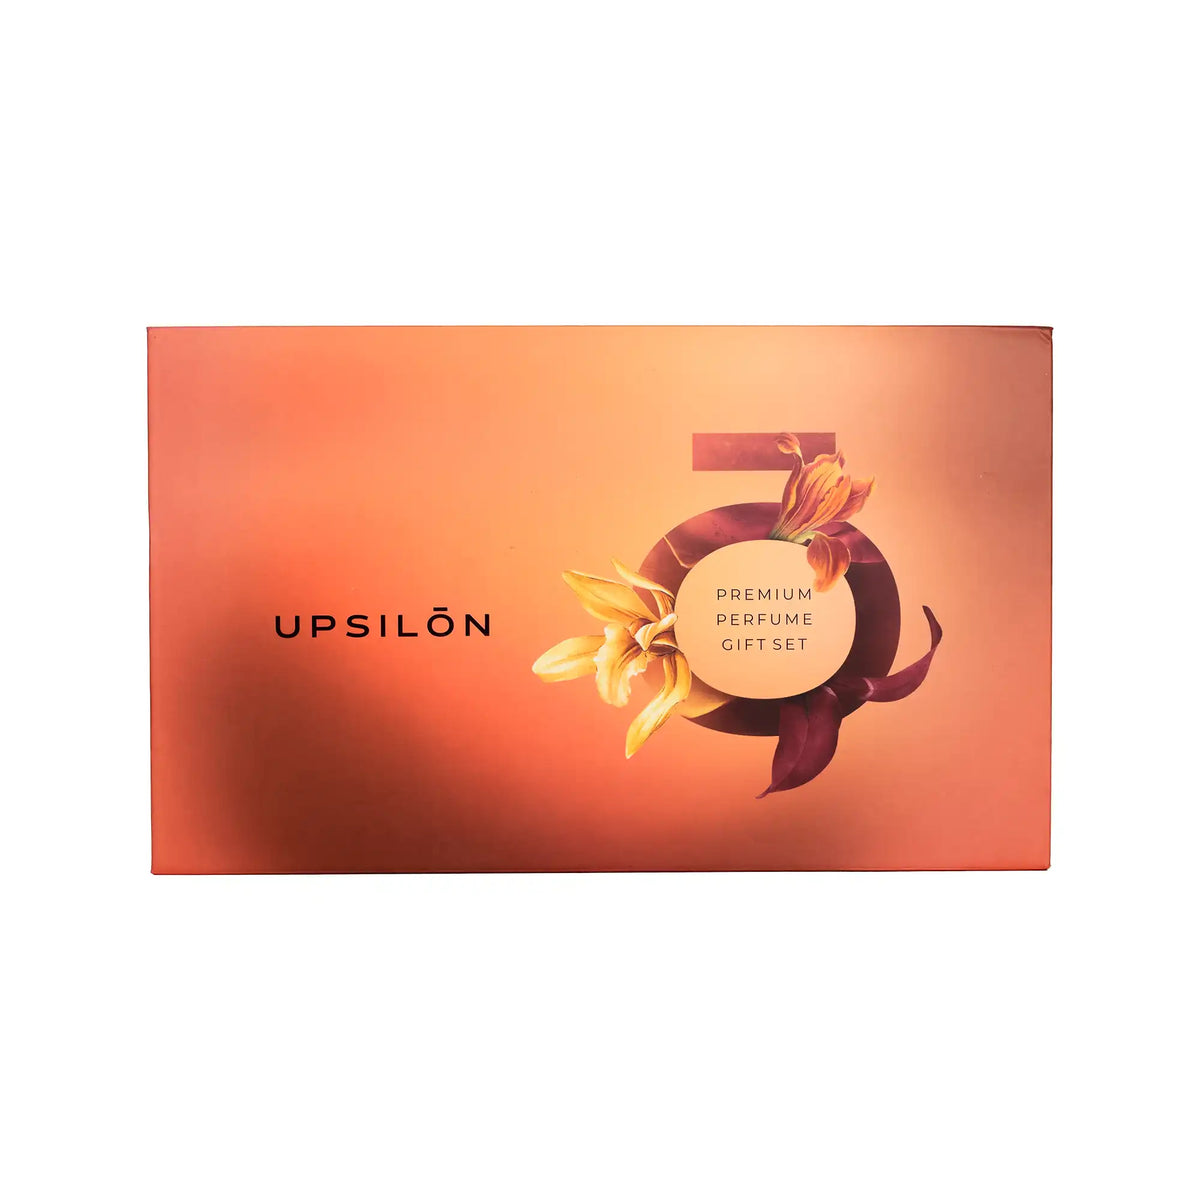 A luxurious Upsilon Premium Perfume gift set for women, featuring three 50ml eau de parfums in floral, fruity, and spicy scents